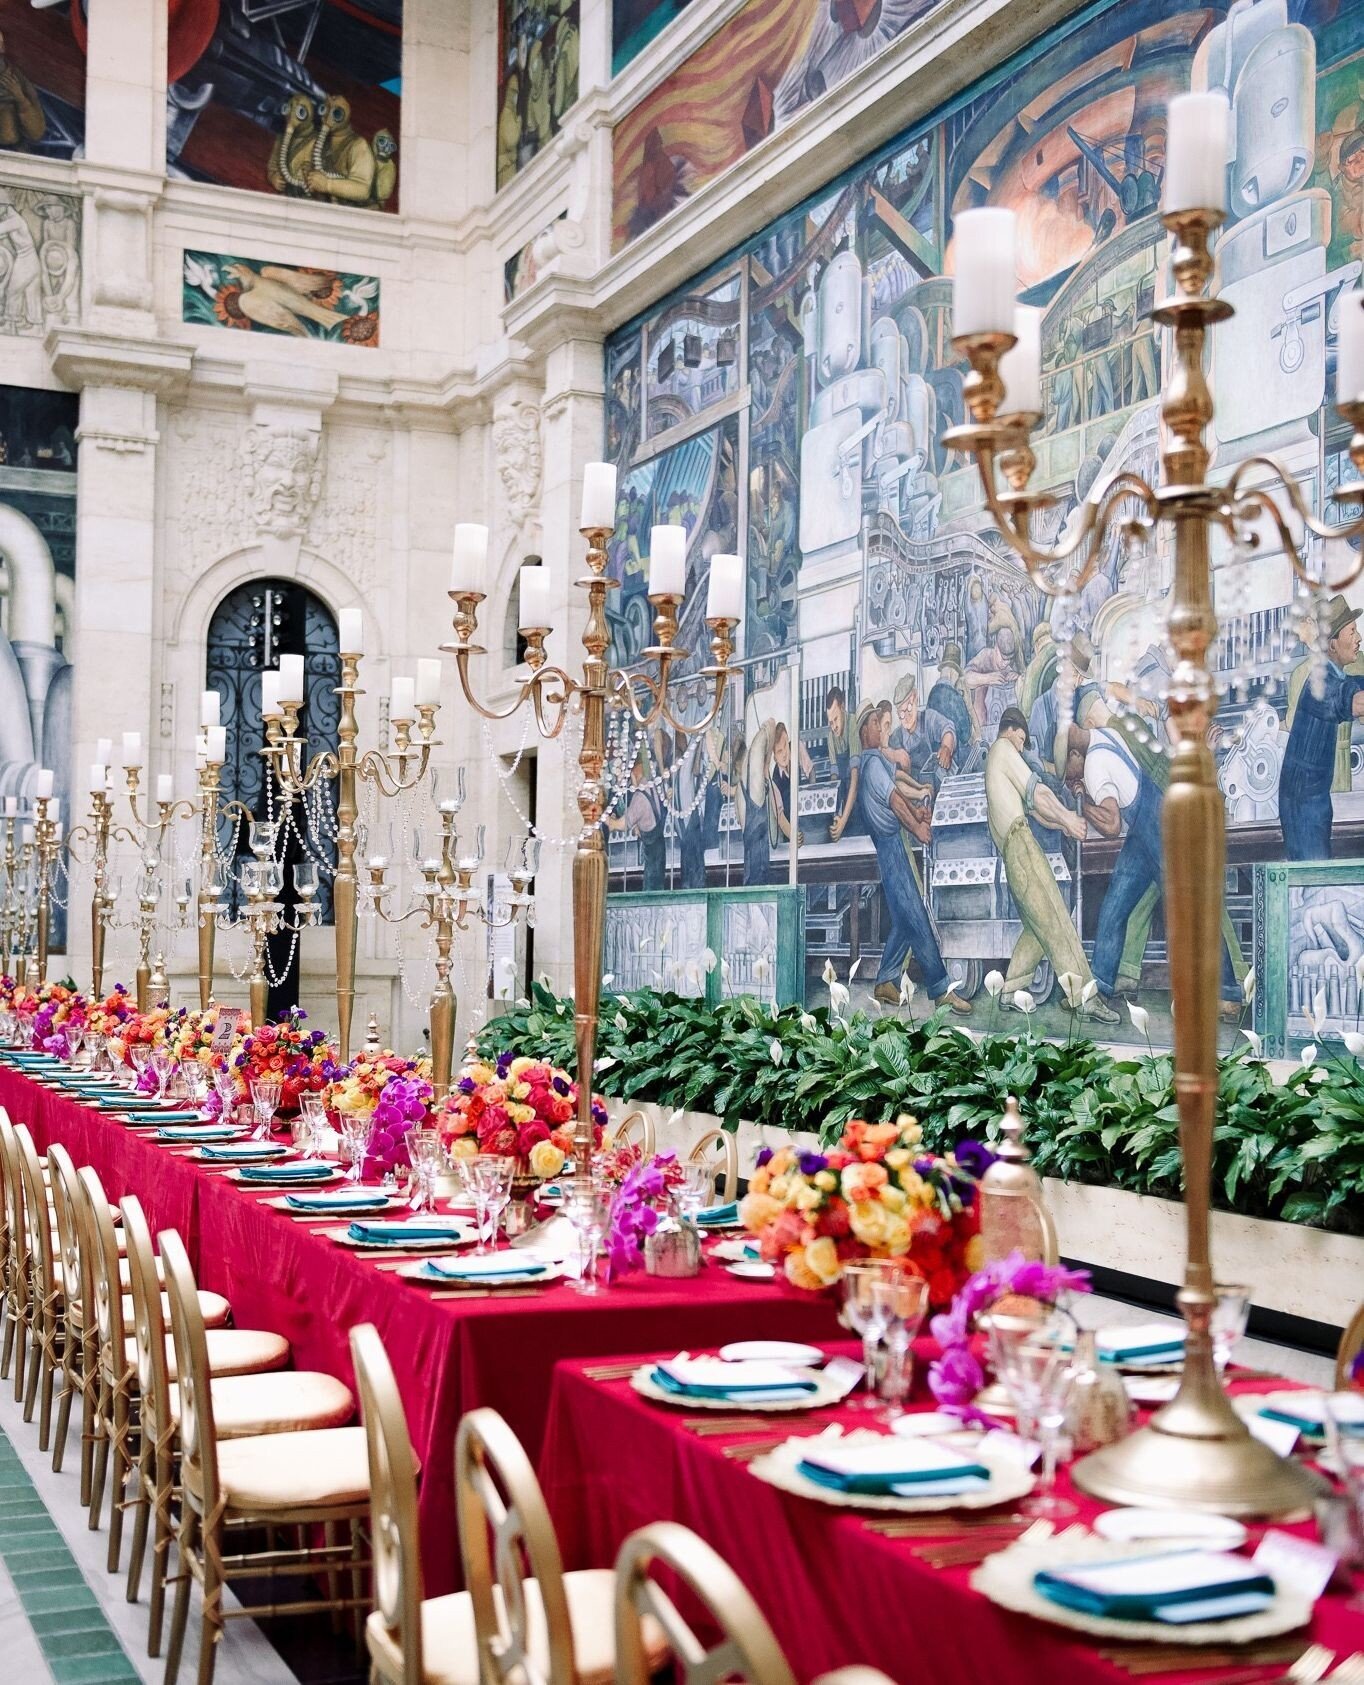 550 Guests⁠
5 Unique Space⁠s
1 Absolutely Honored Team⁠
⁠
The DIA's Annual Gala was still one of the most challenging and rewarding events of our career &mdash; and we have yet to design a centerpiece taller than these stunning 12' candelabras fabric